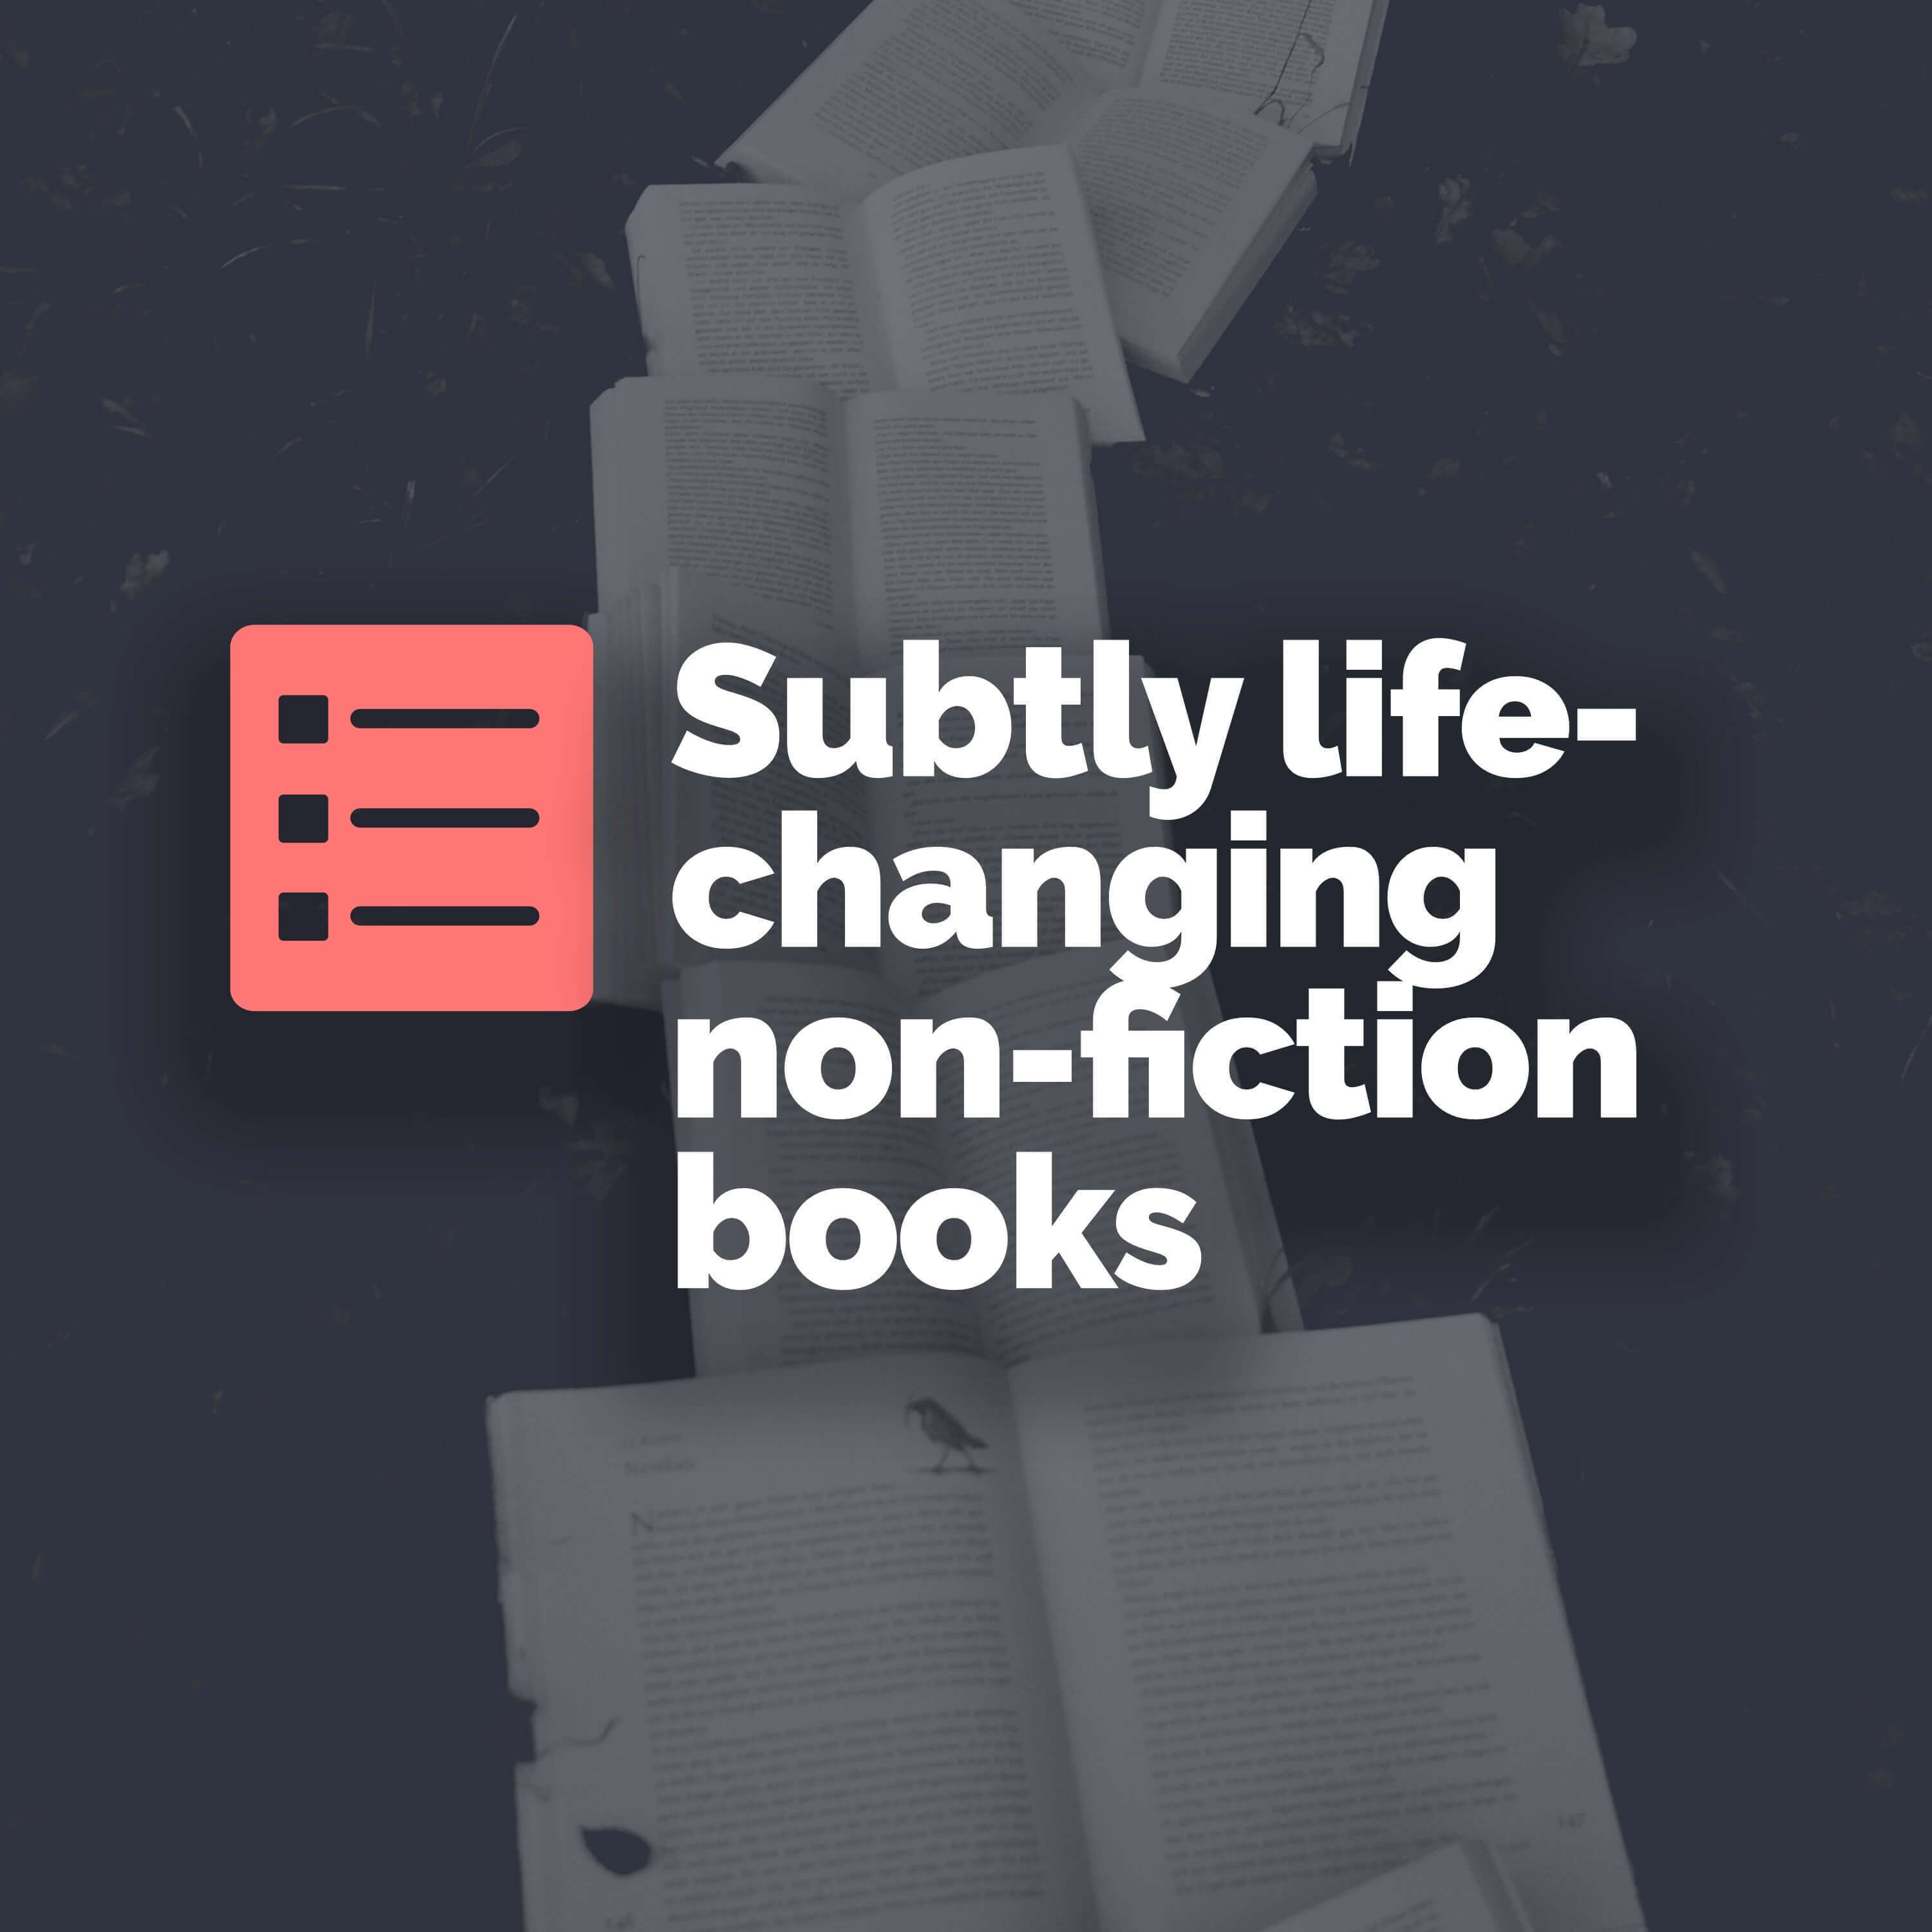 Top 5 subtly life-changing non-fiction books